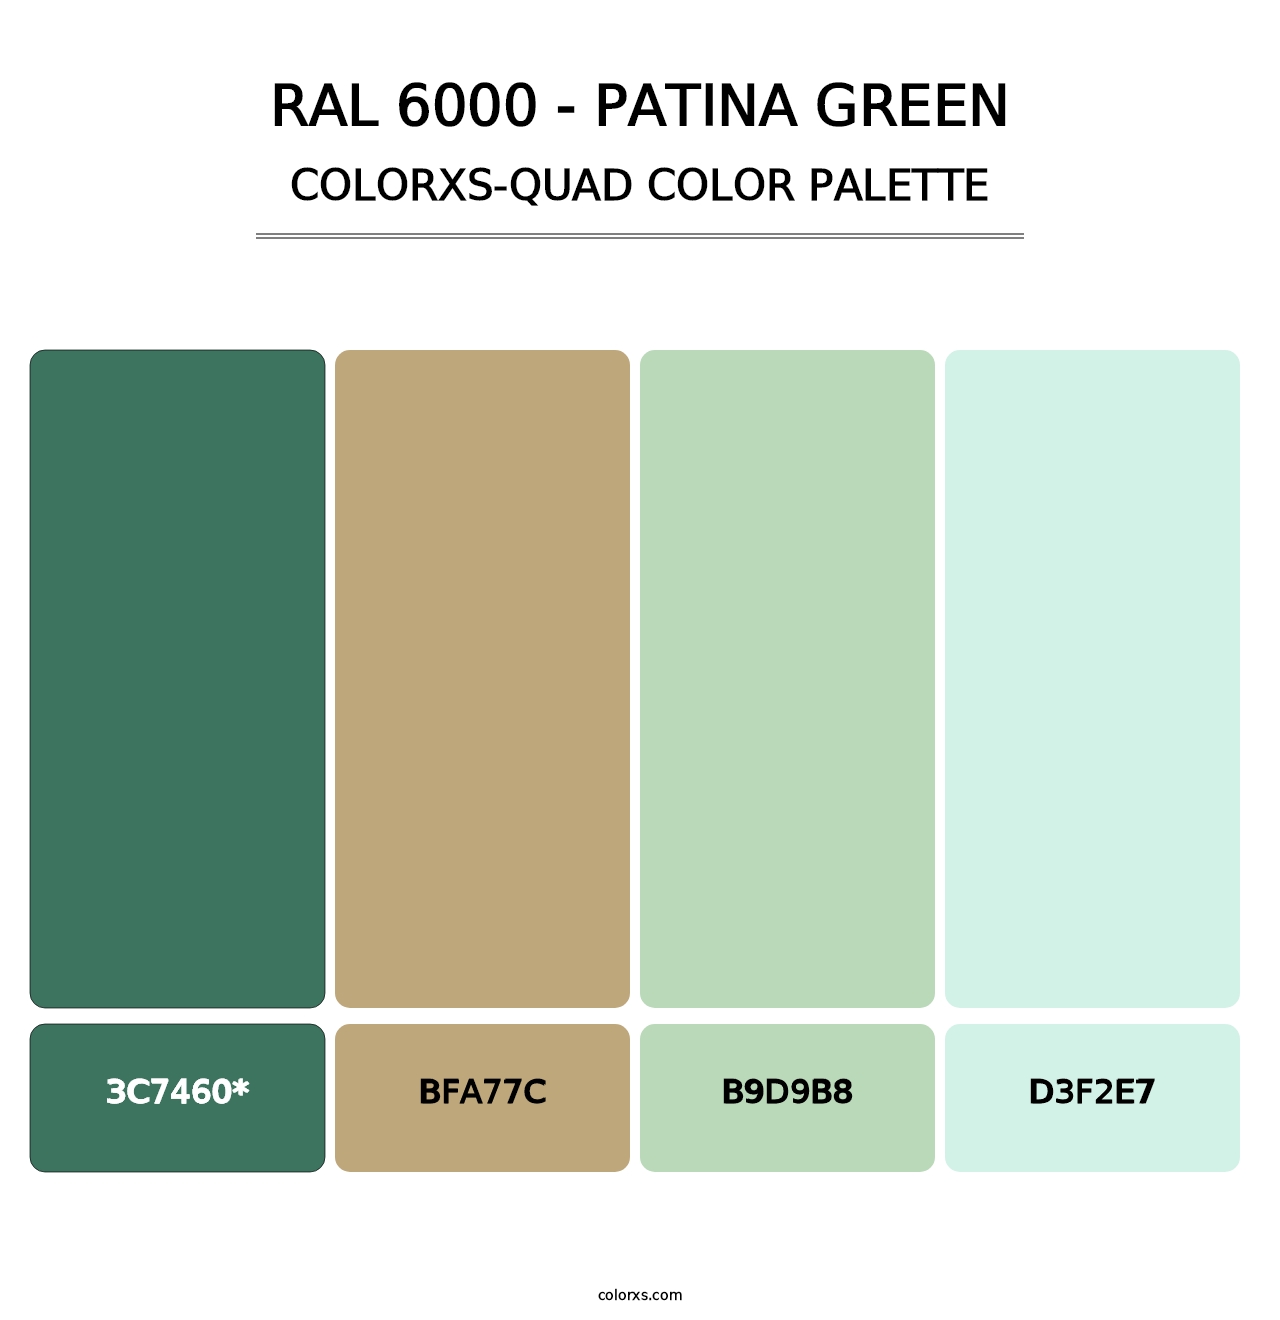 RAL 6000 - Patina Green - Colorxs Quad Palette